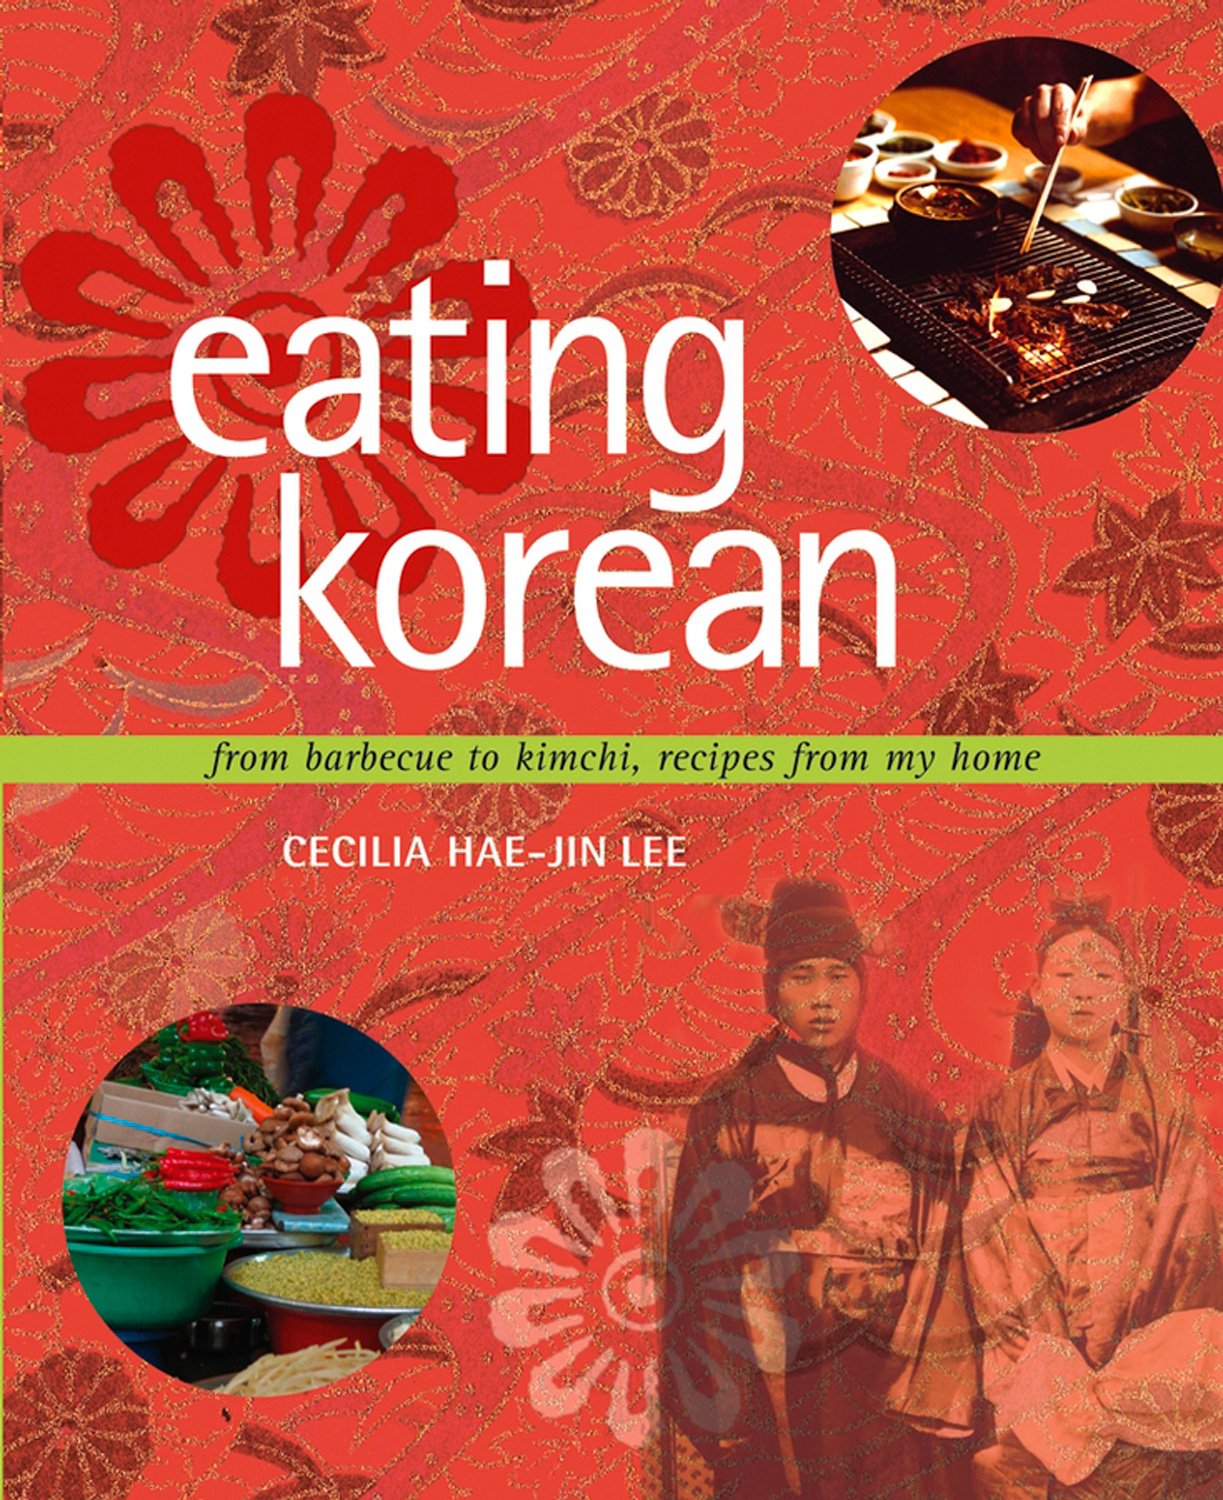 Eating Korean: From Barbecue to Kimchi, Recipes From My Home. (Cecilia Hae-Jin Lee)